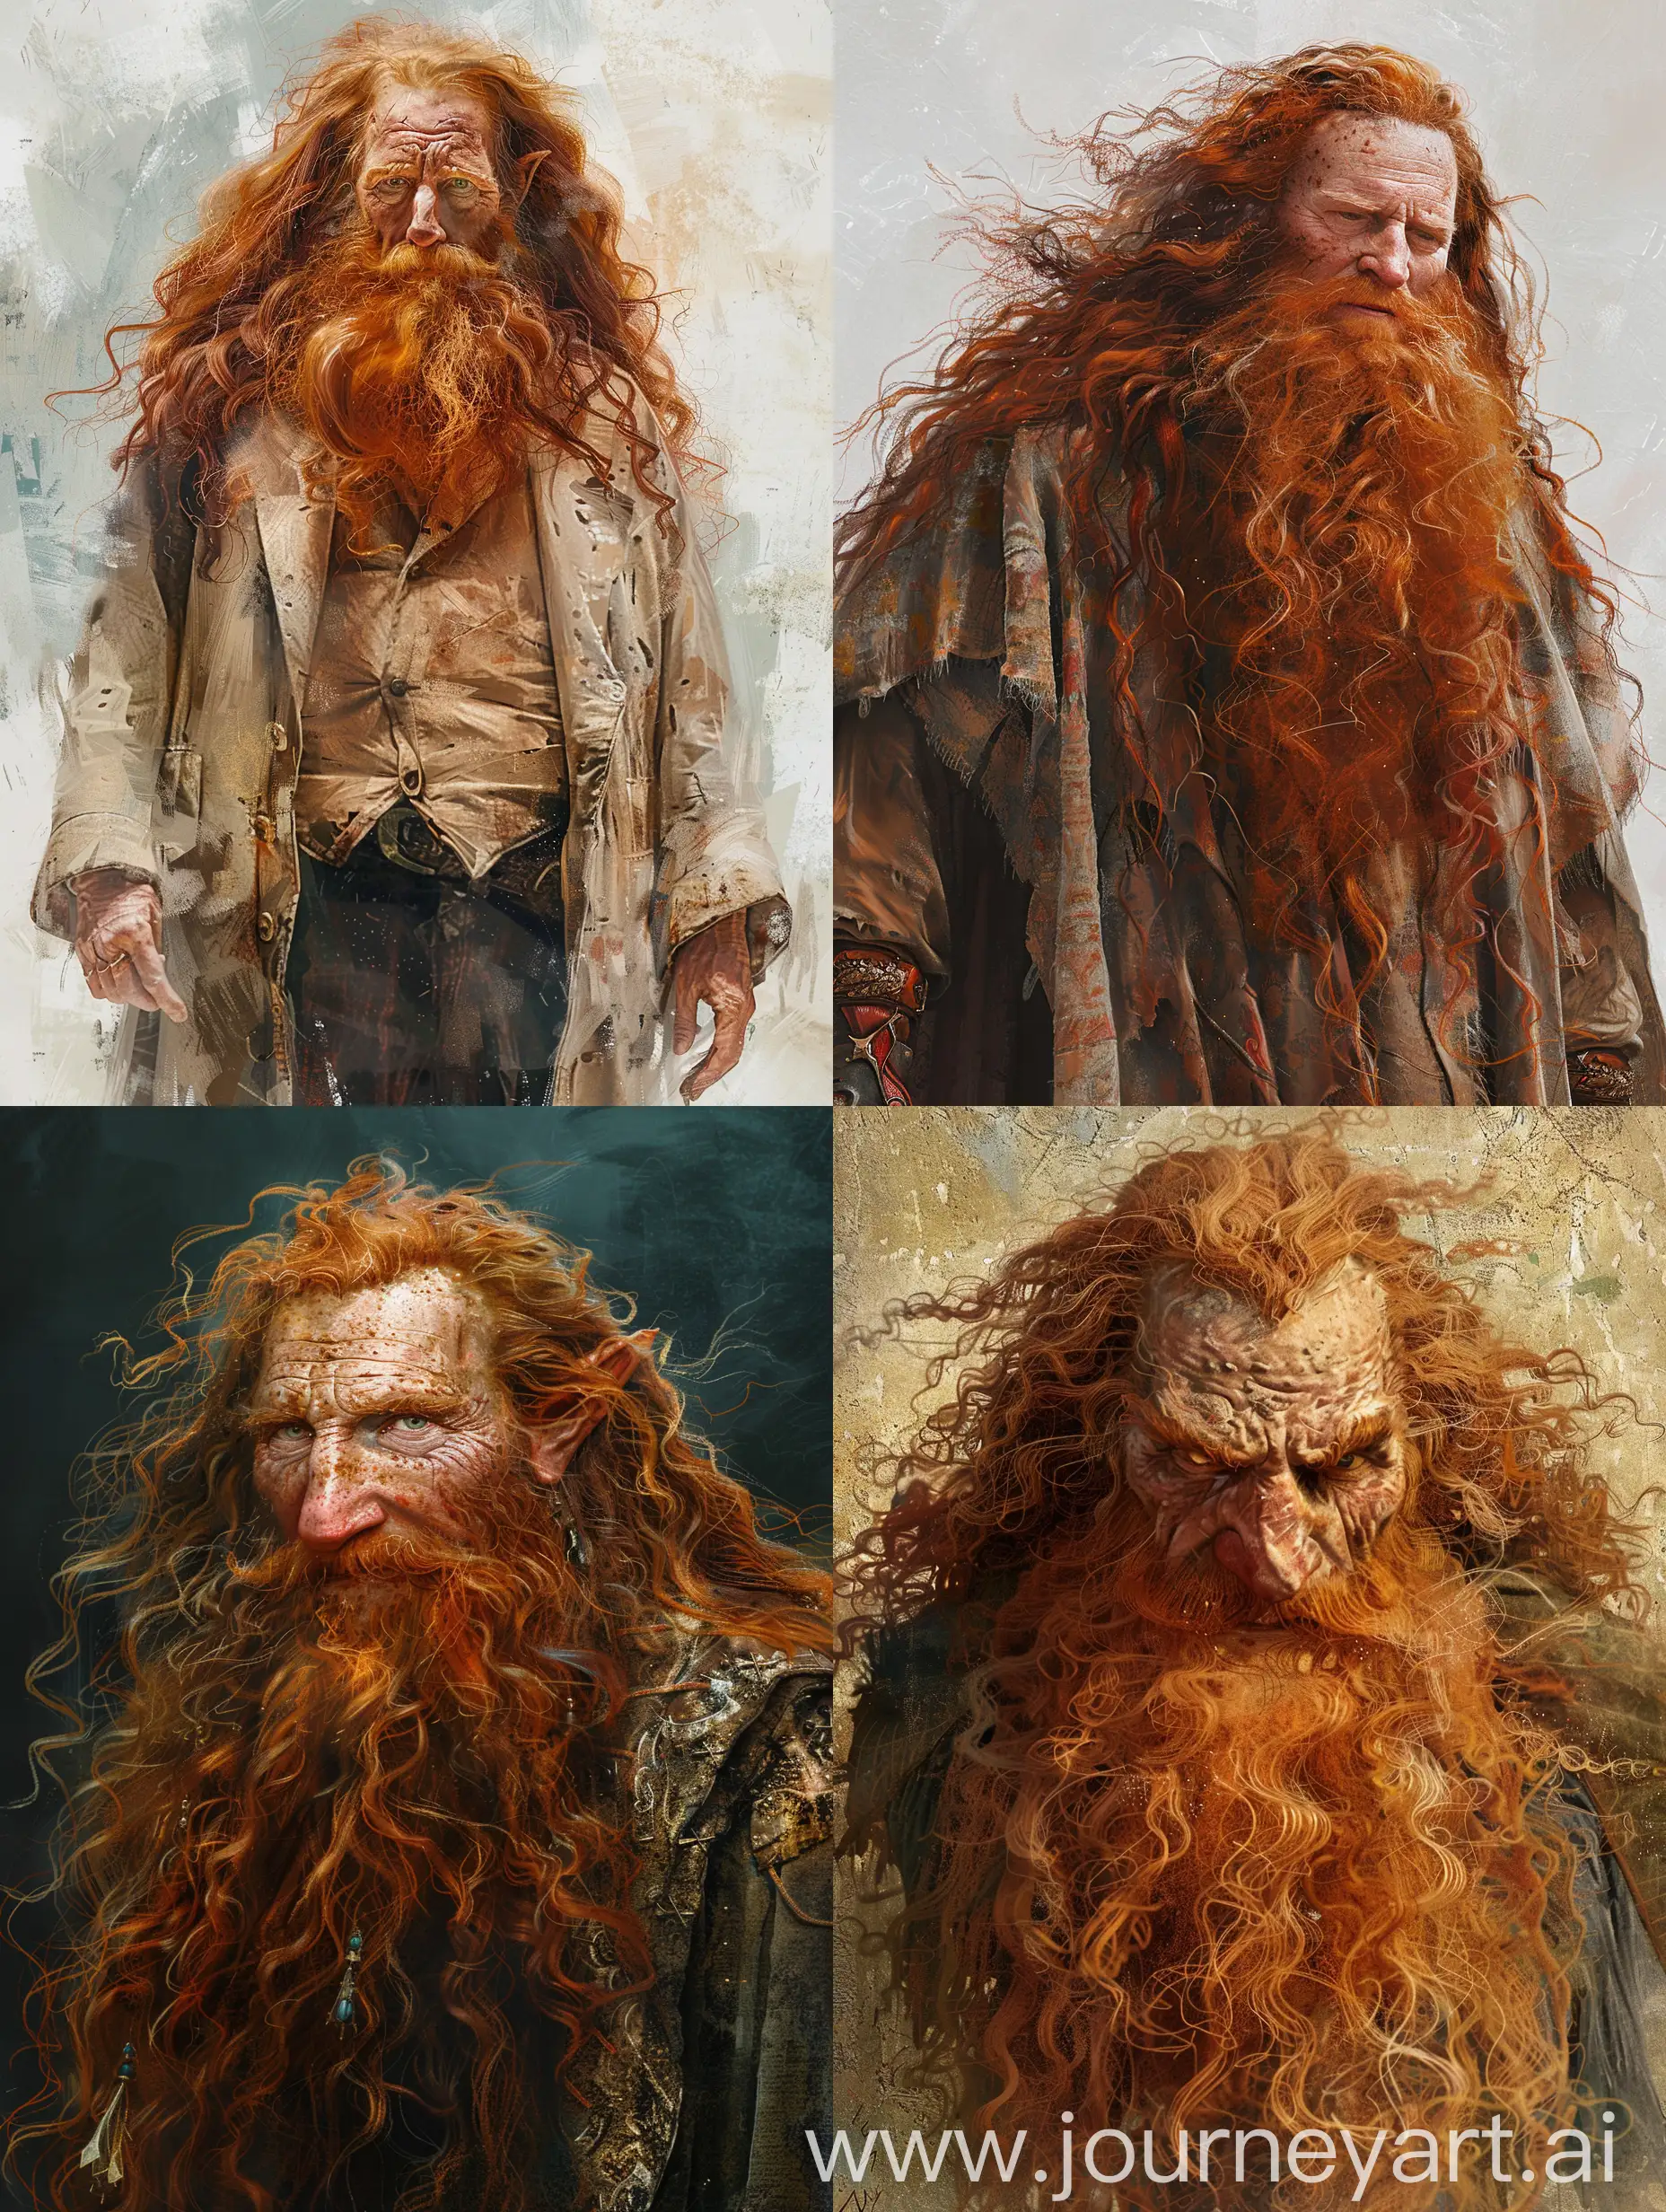 Starting point of details; imagination and fantasy brought to life through ai creativity, megapixels, painting, photo realism, waist up wide shots, intricate immense details bringing characters of story to life.

Subject details 1; a supernatural older magical man of historic world renowned abilities. 

Subject details 2; long red hair and beard, crooked nose, tall and imposing and calm.

Detail style and color; detailed paiting by gaston bussiere, craig mullins, Impressionism, impasto, baroque, impressionist, mythological oil painting watercolor painting, -- iw 1.6